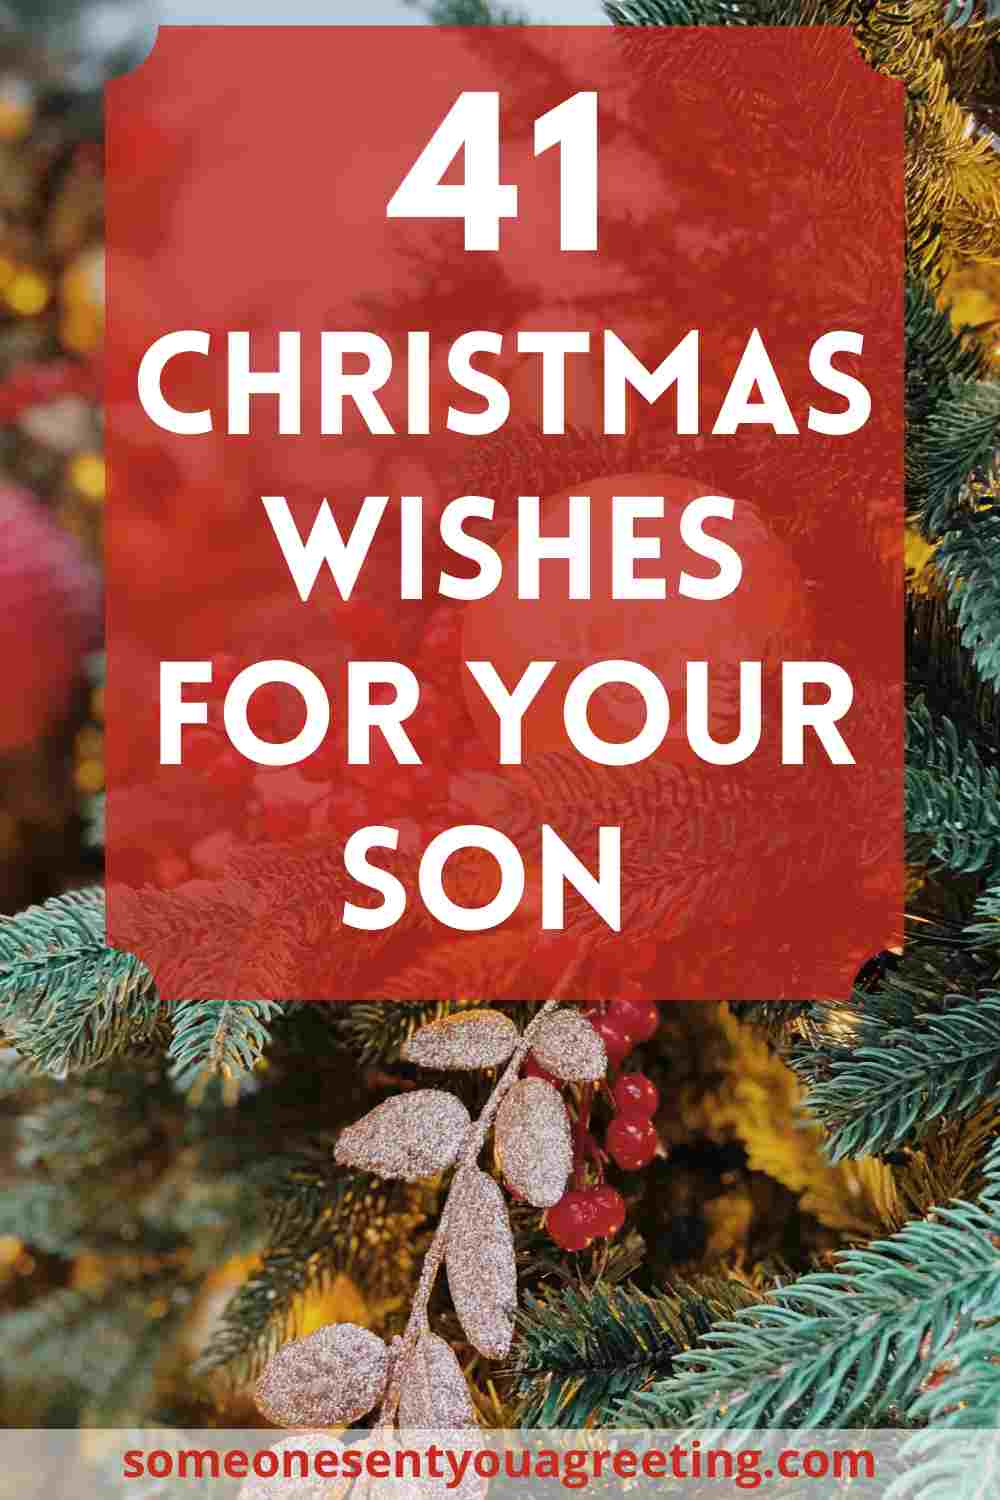 Christmas wishes for son